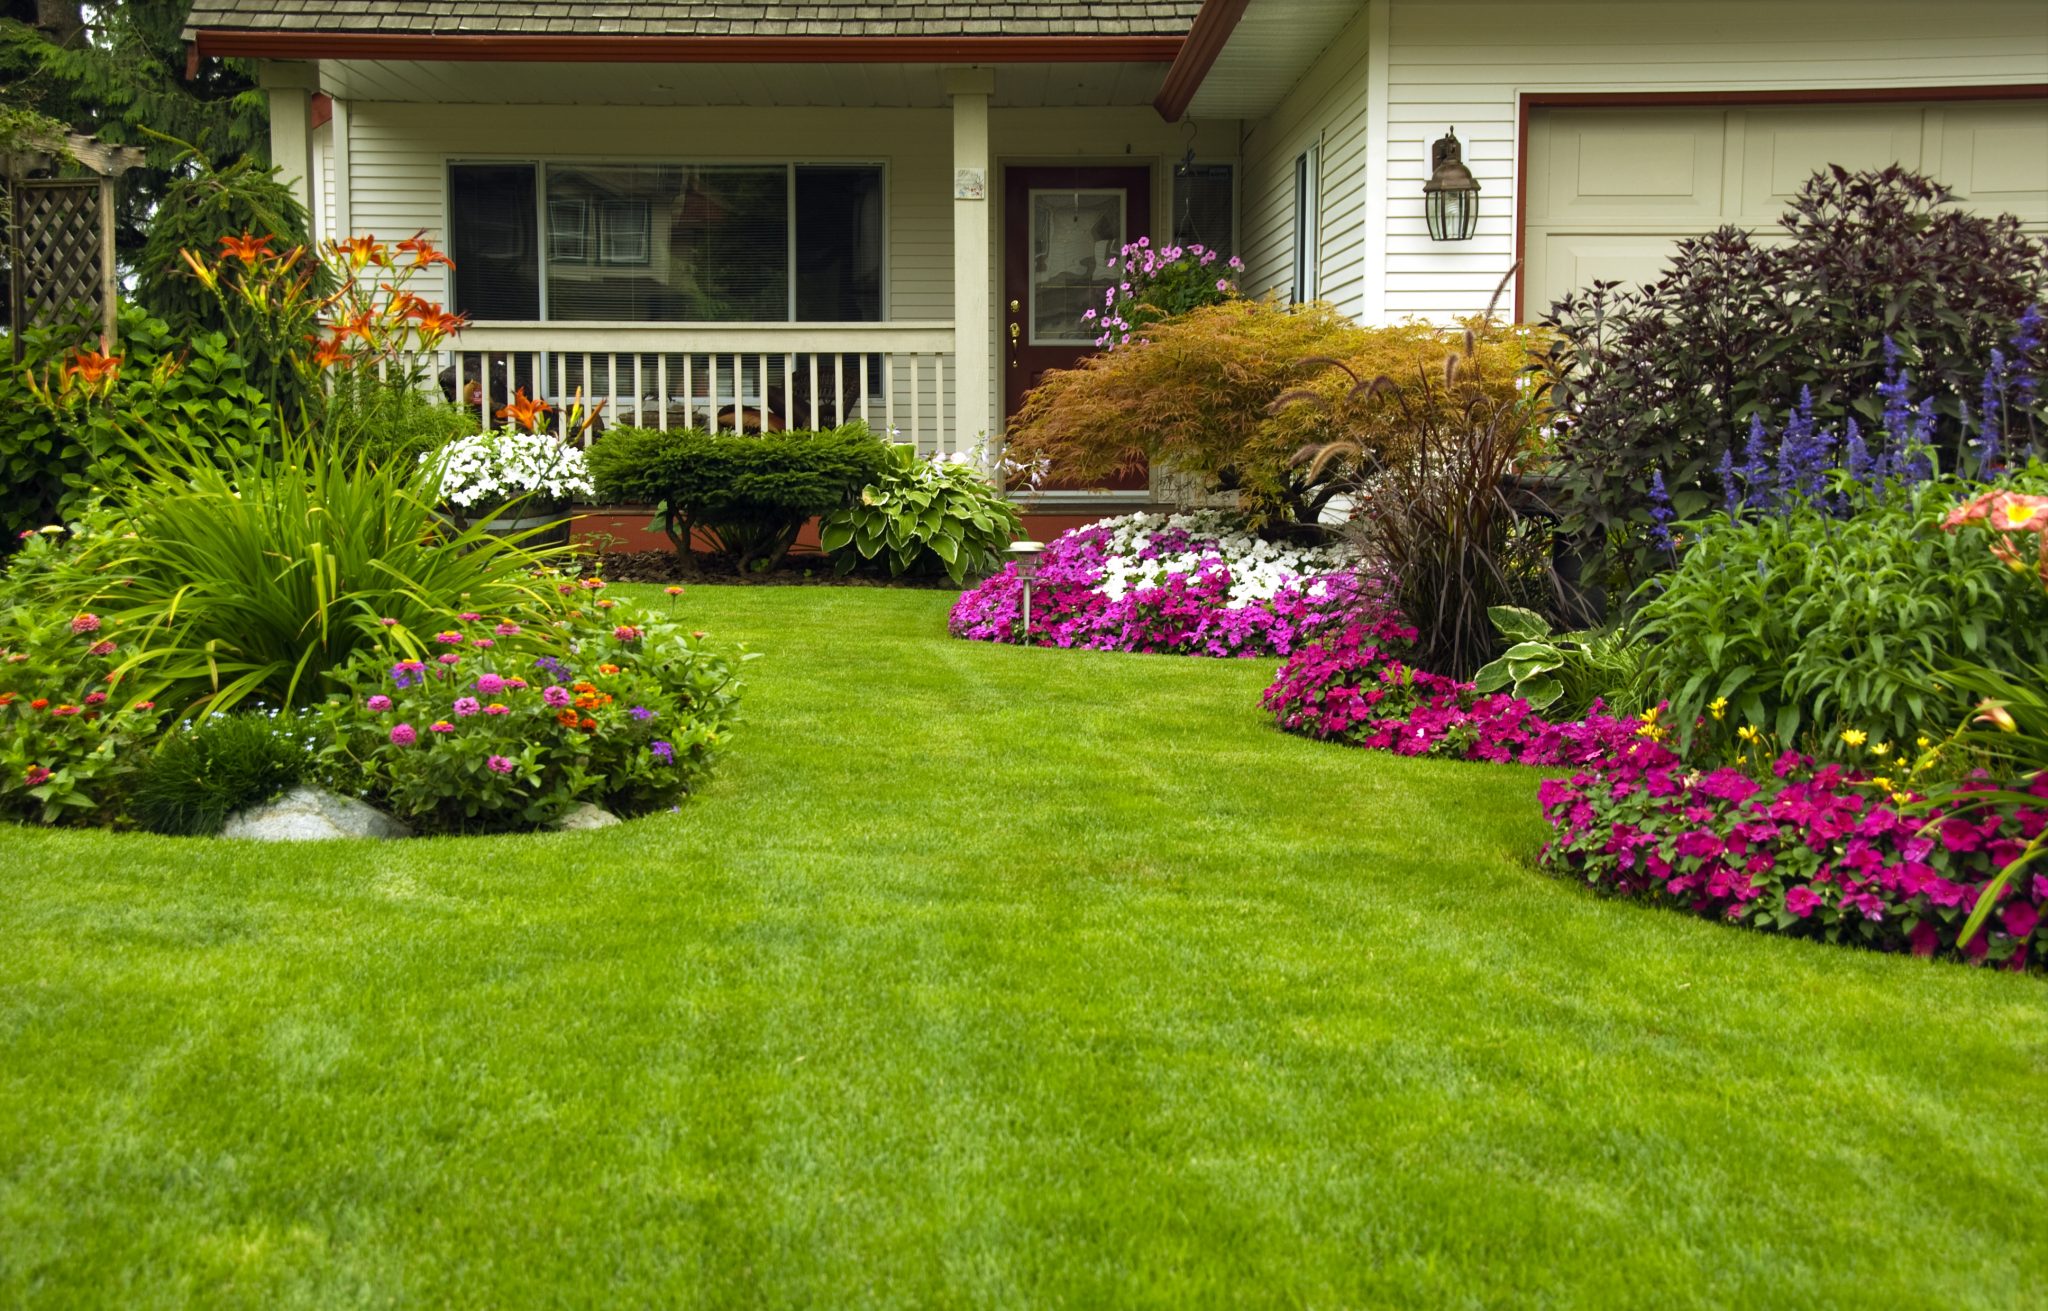 Planning Front Yard For Landscaping Affordable Lawn Care - How To Plan Landscaping For Front Yard